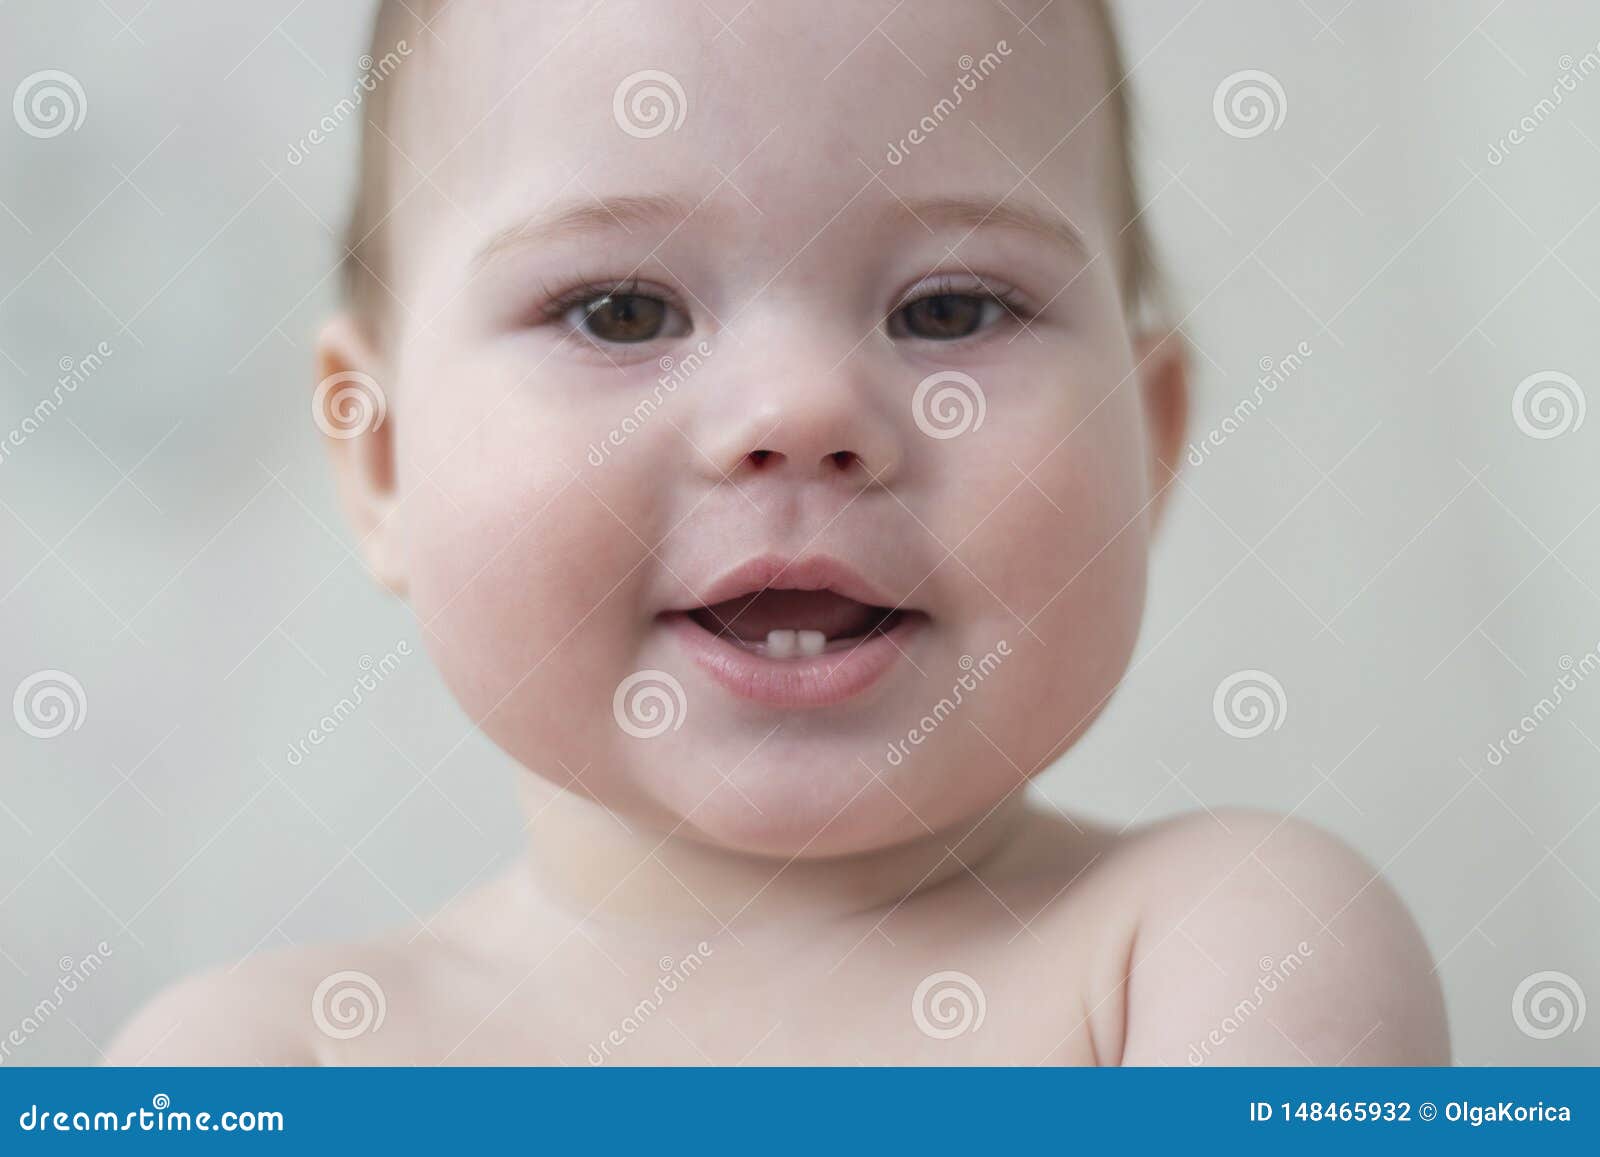 What Causes Redness Around a Baby's Eyes?